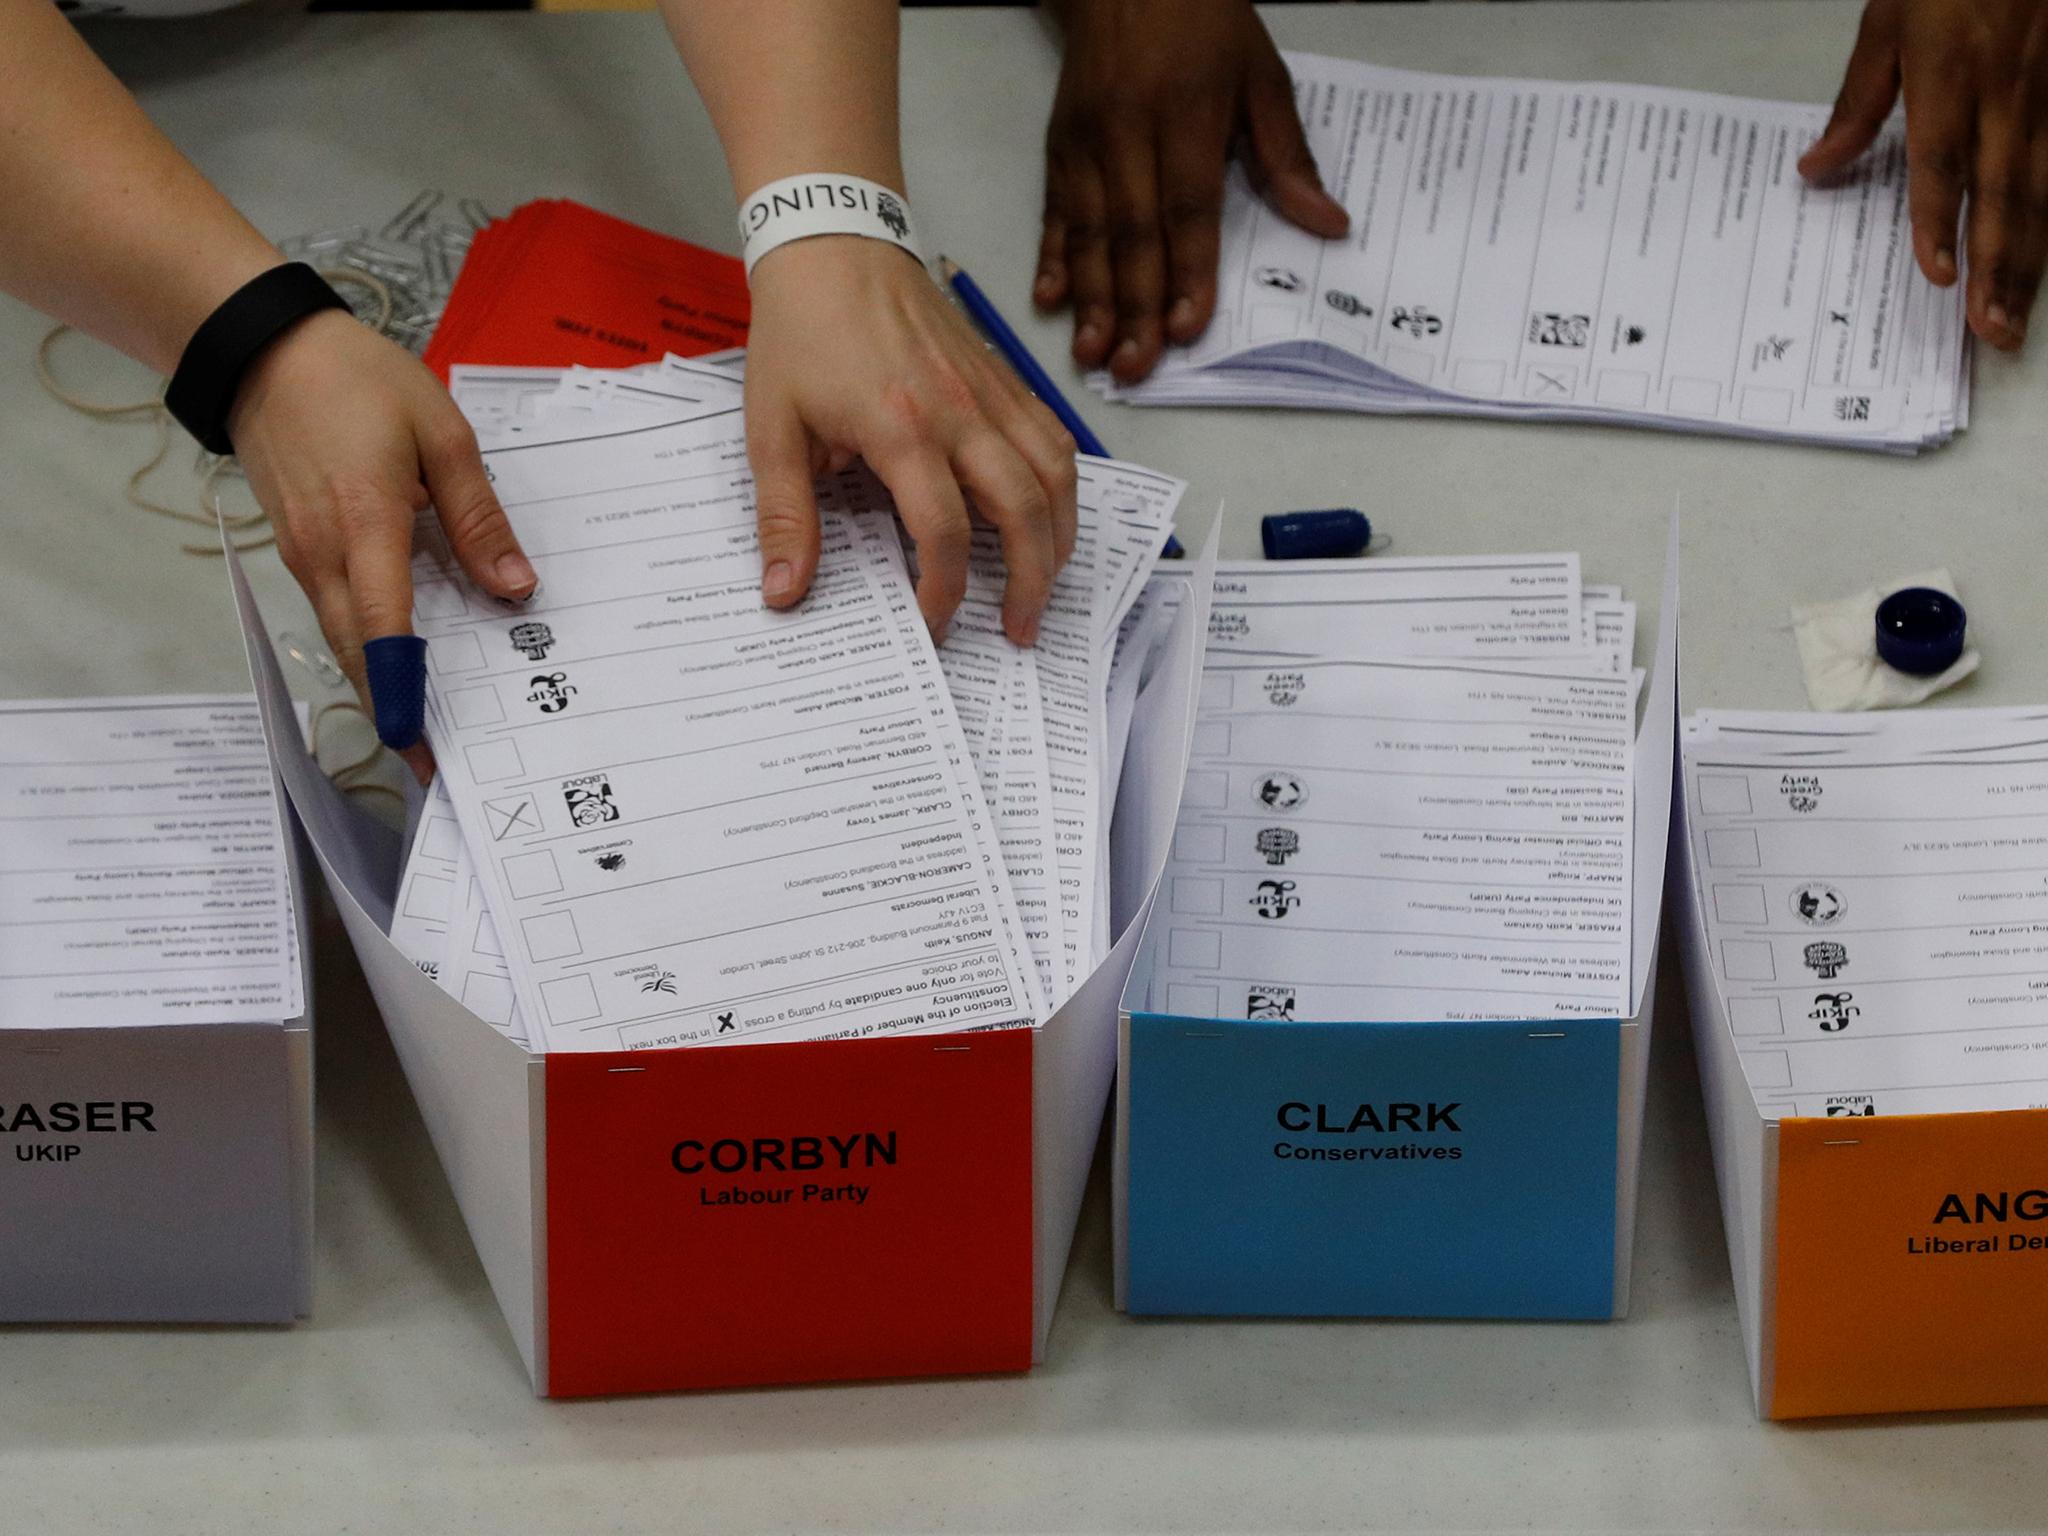 There is no ‘hung parliament’ option on the ballot paper